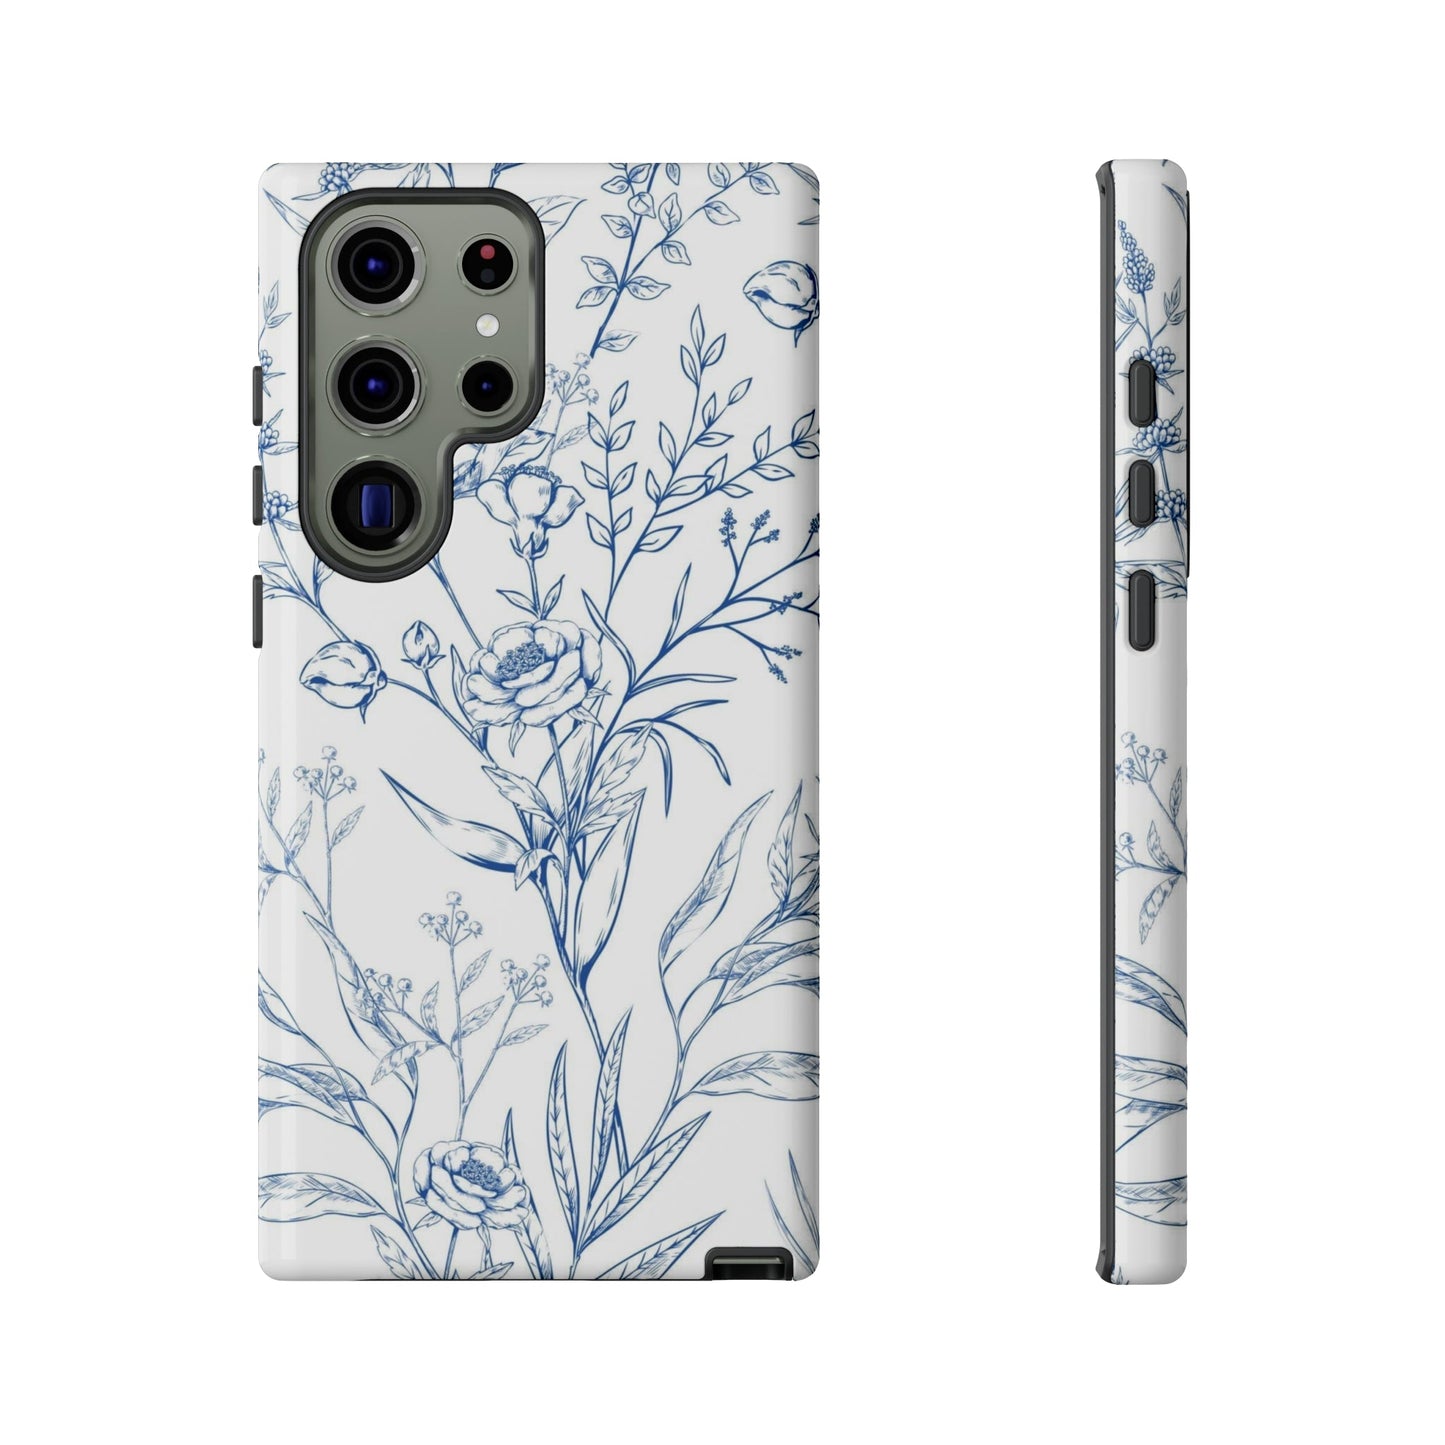 Blue Floral Phone case fits iPhone Samsung Galaxy Google Pixel - Cheerful Lane